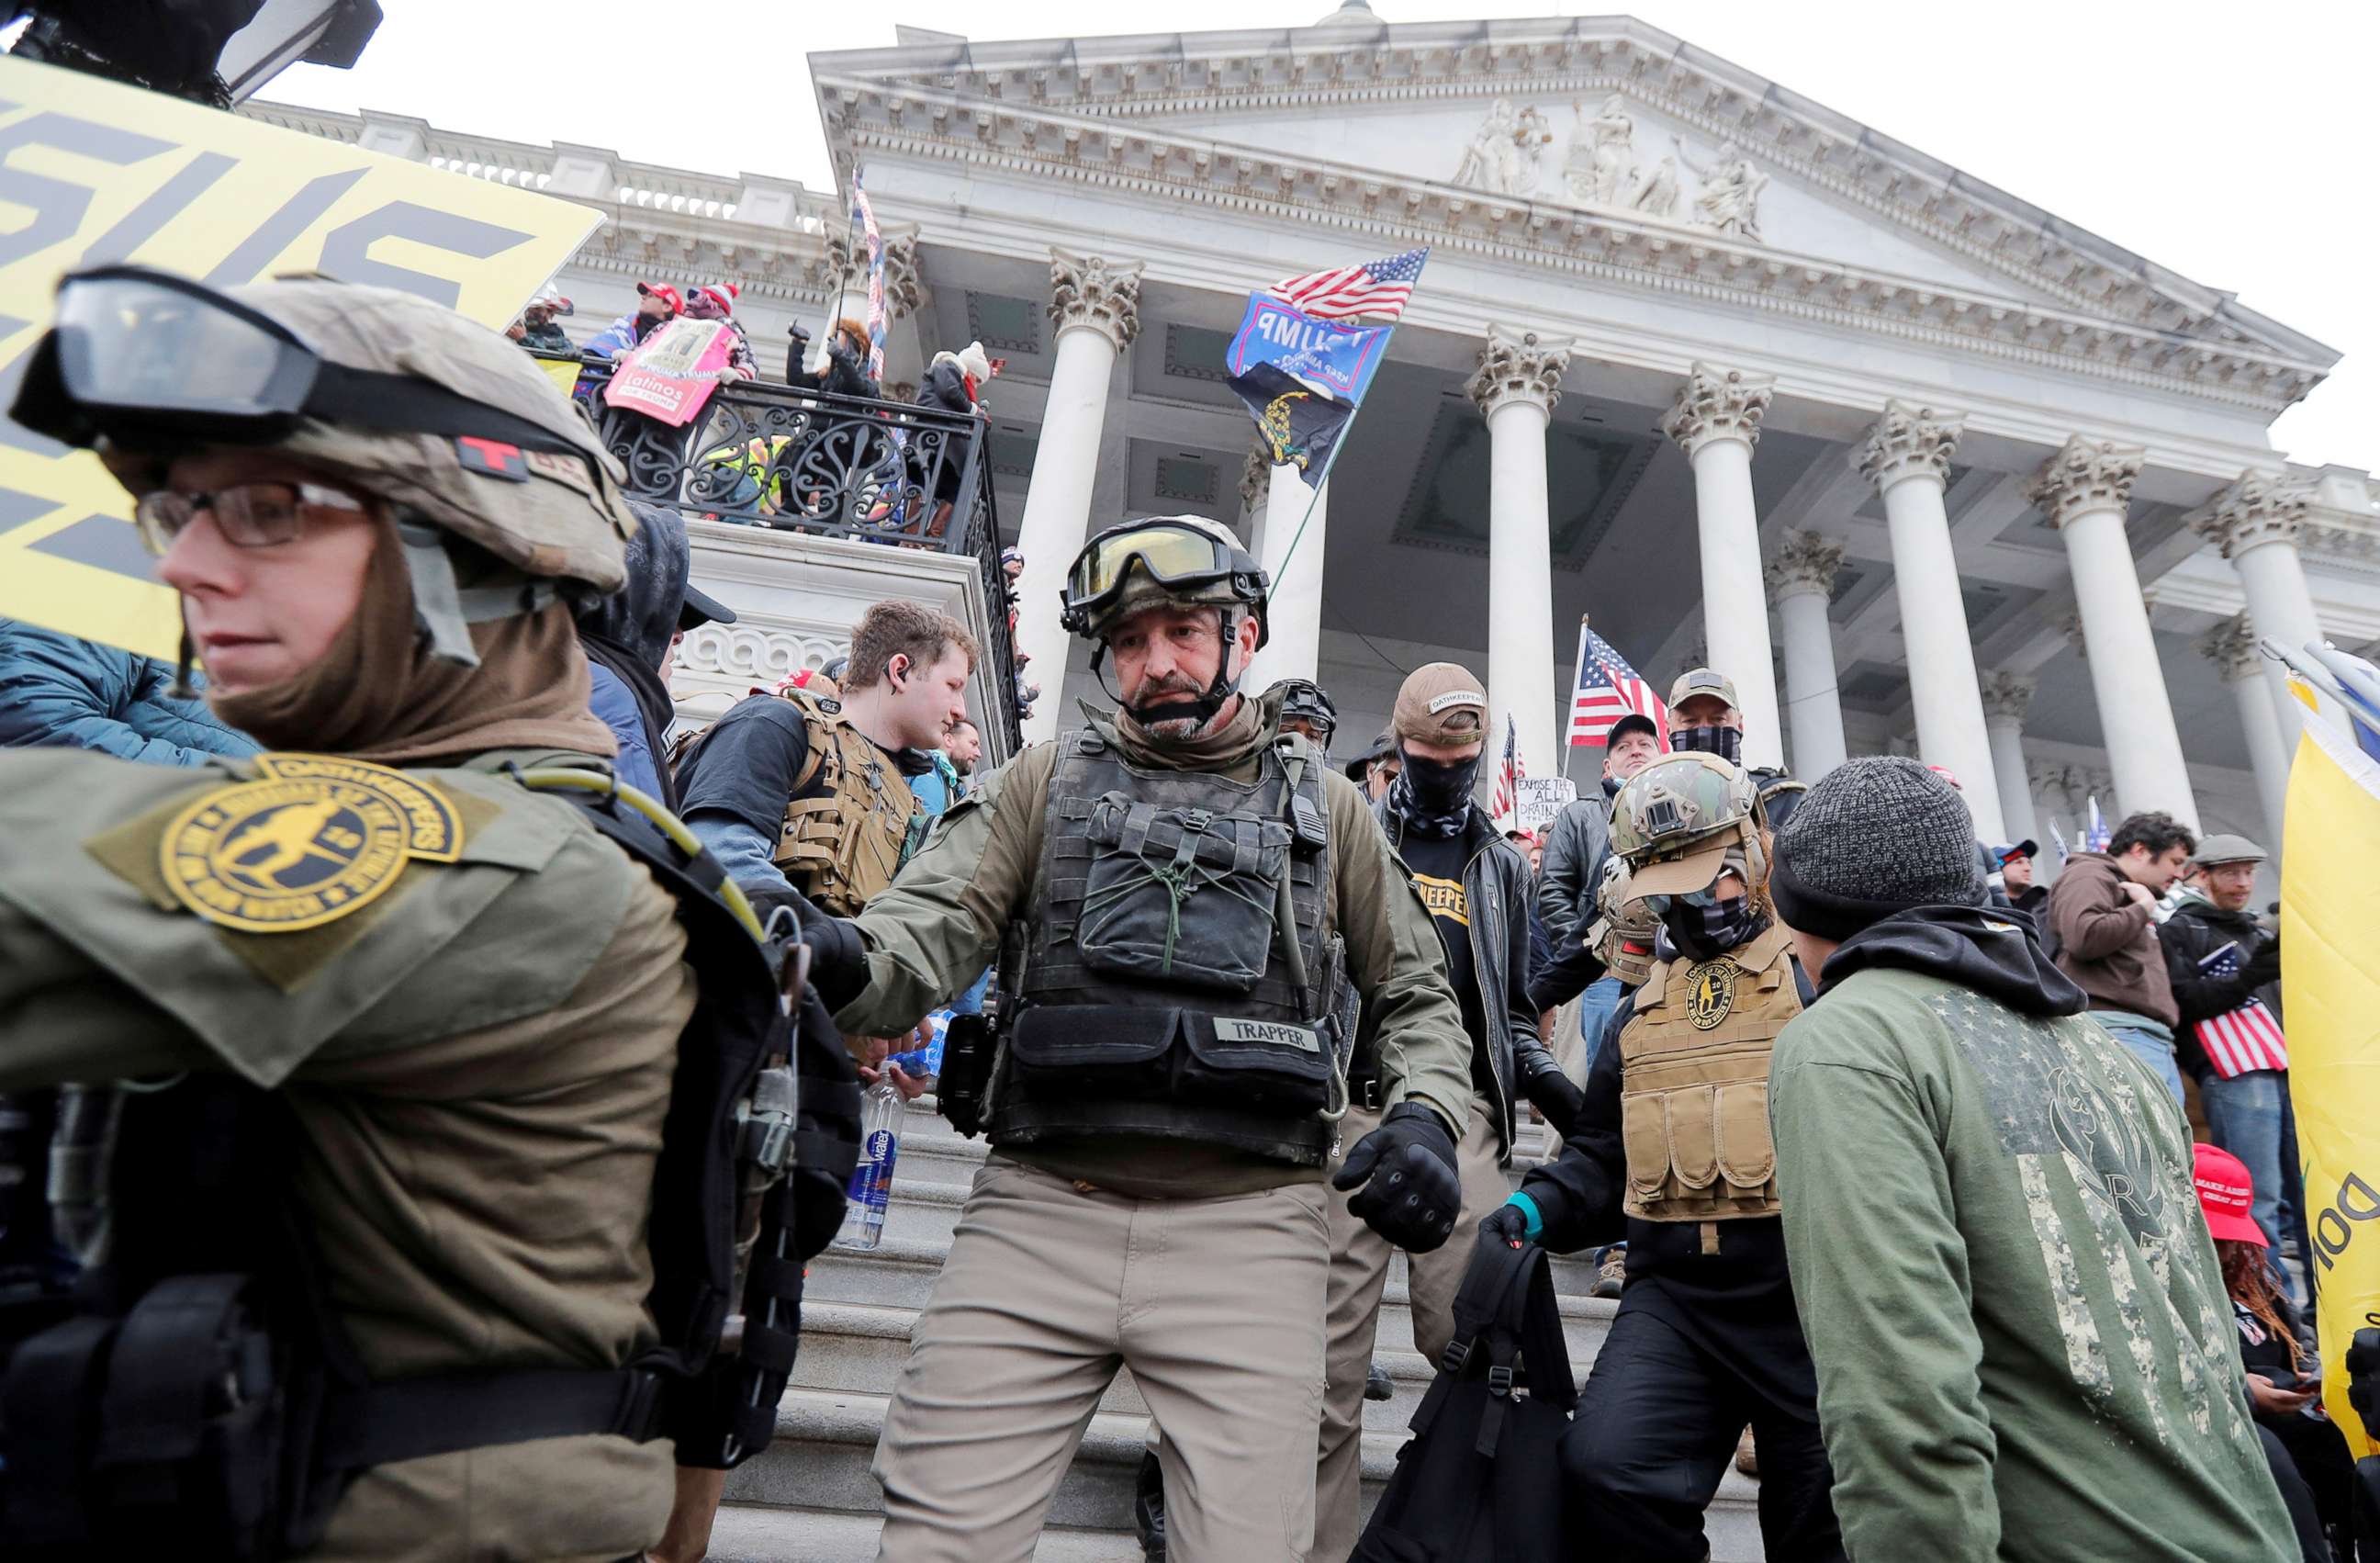 PHOTO: Jessica Marie Watkins (l) and Donovan Ray Crowl (c), both from Ohio, march down the East front steps of the Capitol with the Oath Keepers militia group among supporters of President Donald Trump protesting in Washington, Jan. 6, 2021.